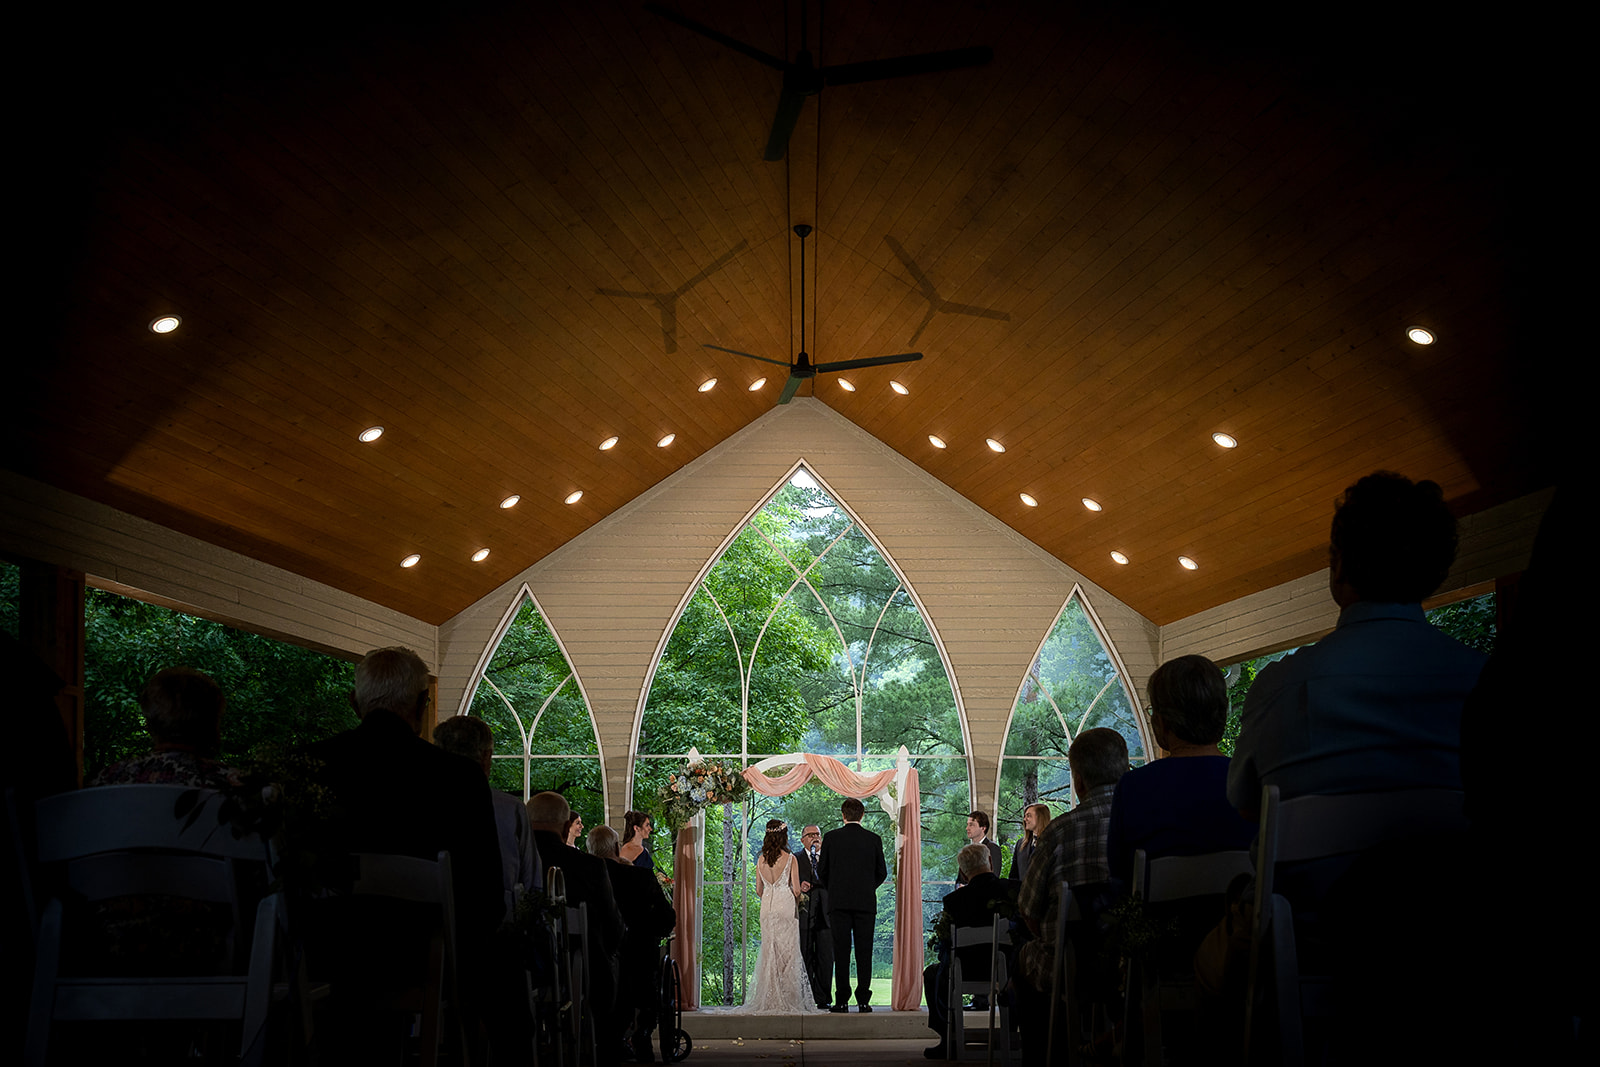 Winnebago Springs Serenity: MN Wedding Venue by La Crosse photographer, Jeff Wiswell of J L Wiswell Photography